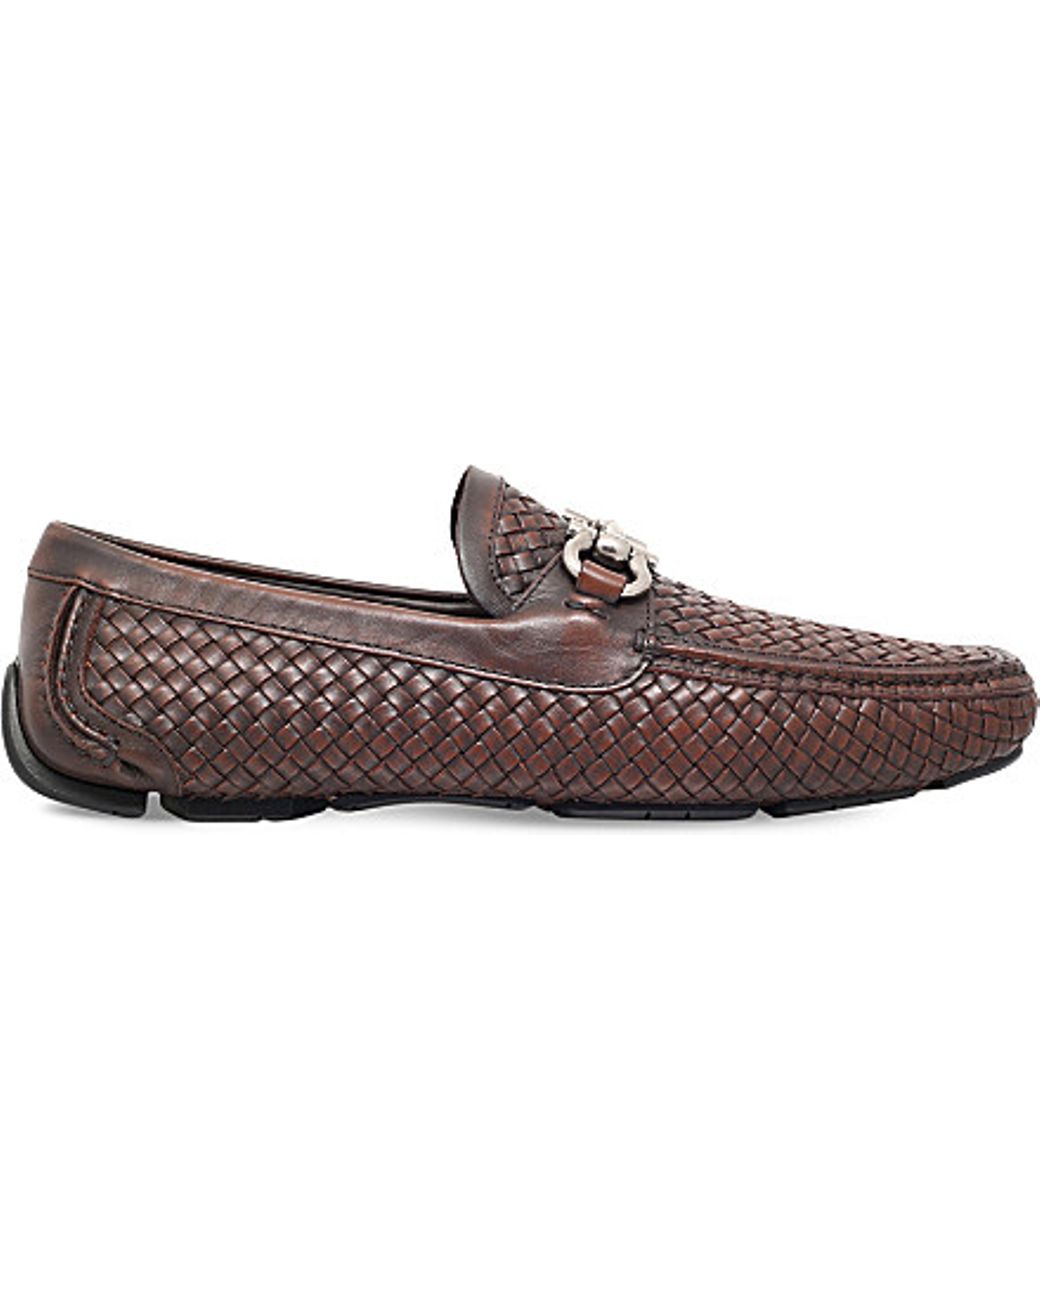 Ferragamo Leather Gaucho Driving Shoes in Burgundy Purple Mens Shoes Slip-on shoes Loafers for Men 